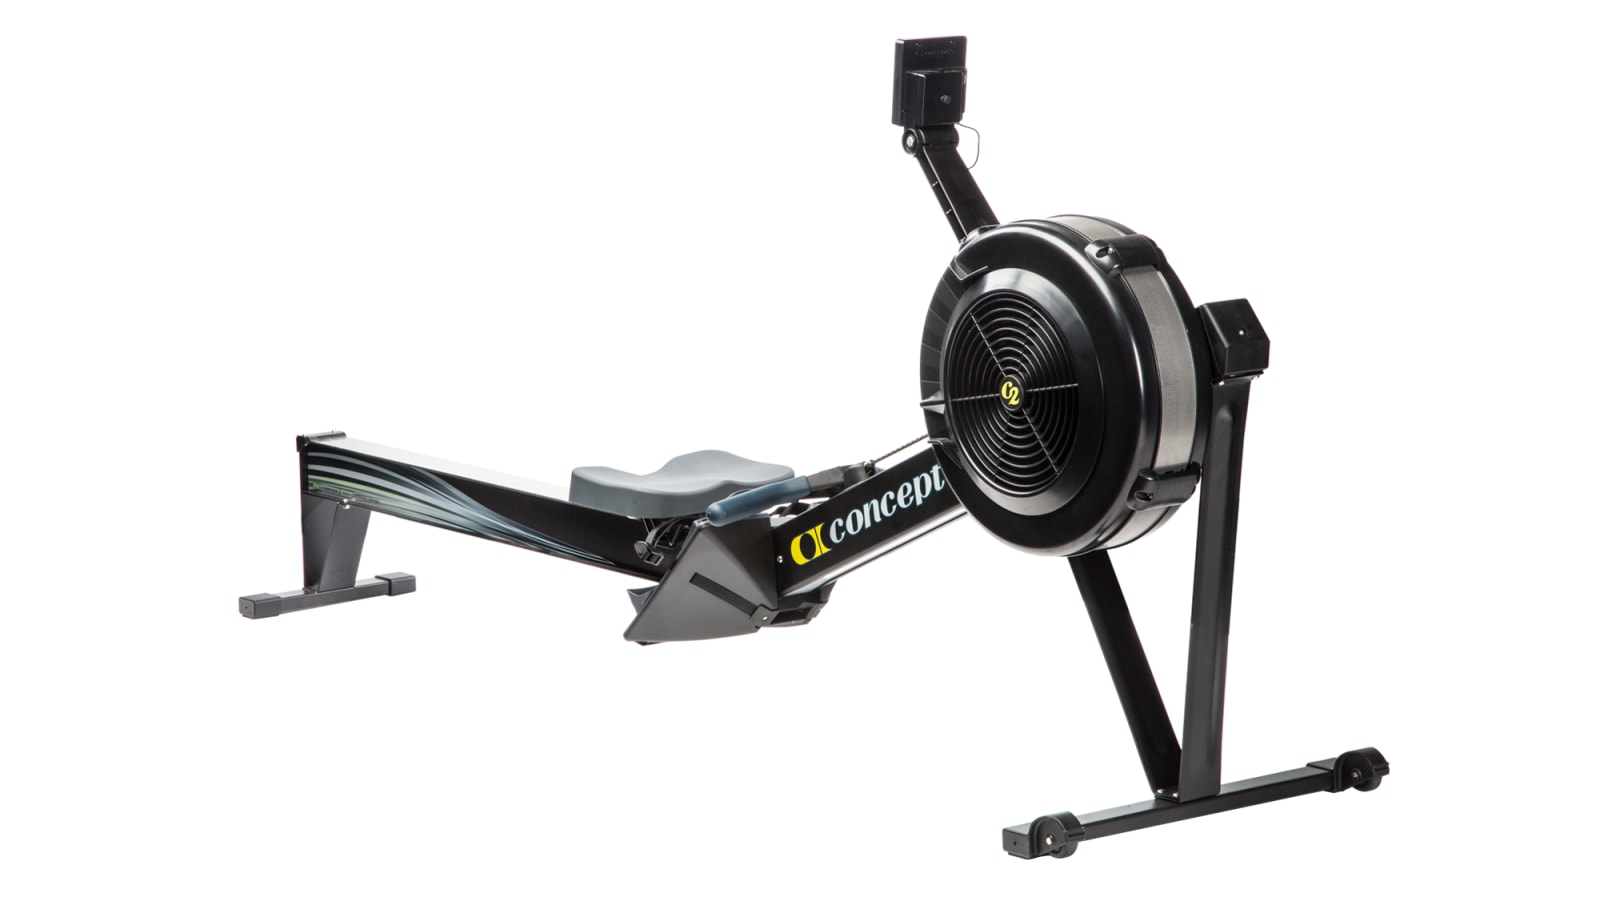 79 Recomended How to turn on concept 2 rowing machine for Workout Everyday